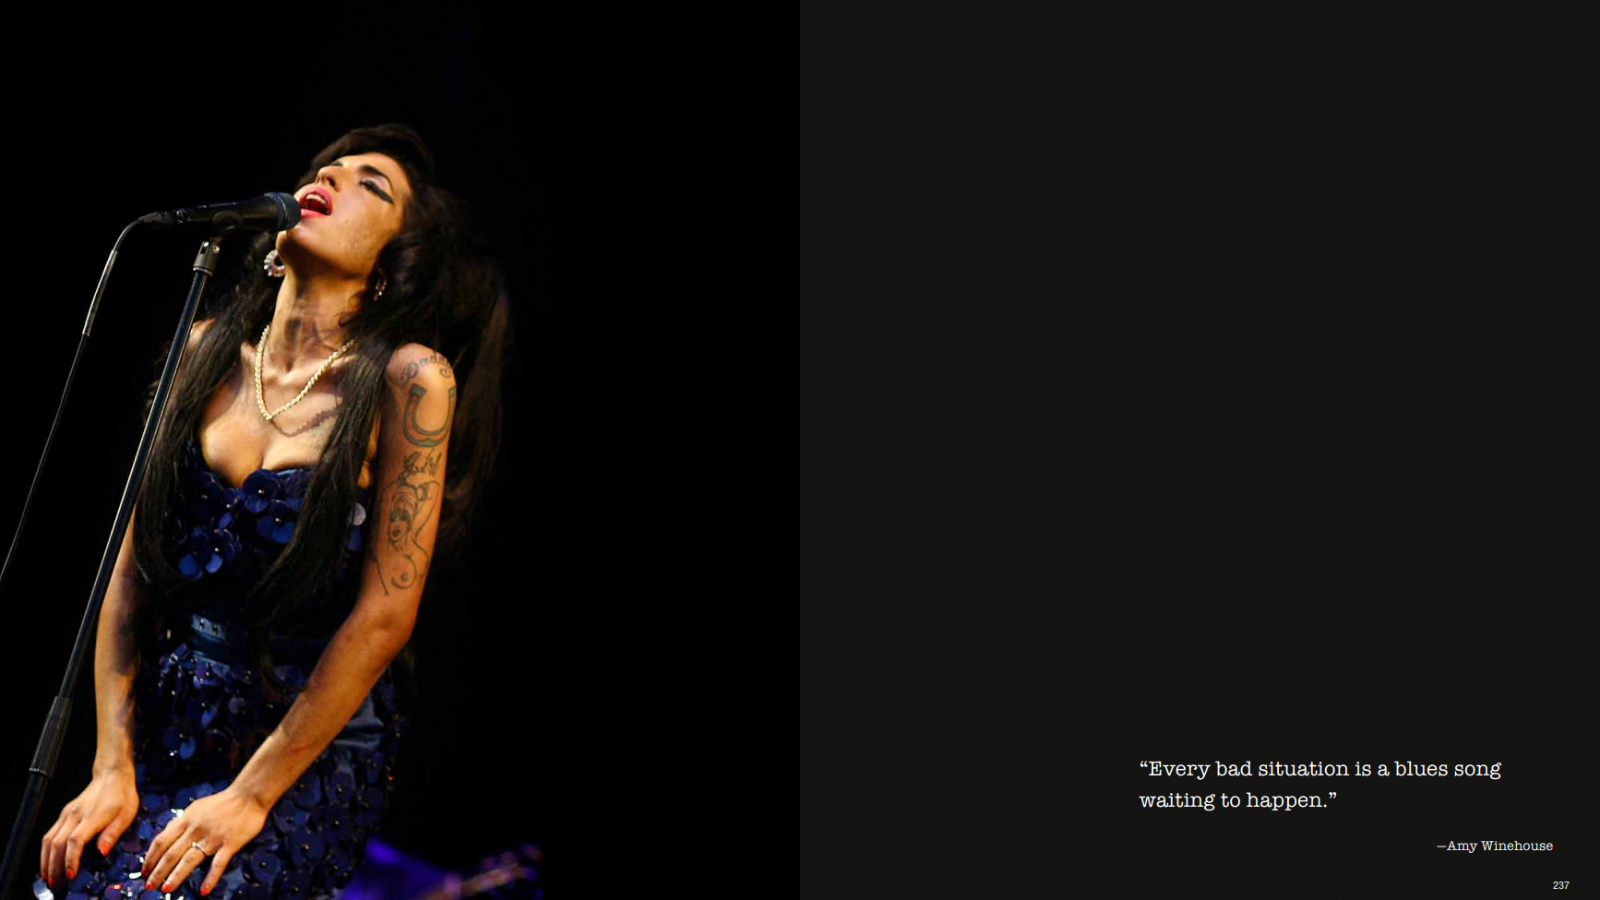 Amy Winehouse with a quote from her reading "Every bad situation is a blues song waiting to happen."